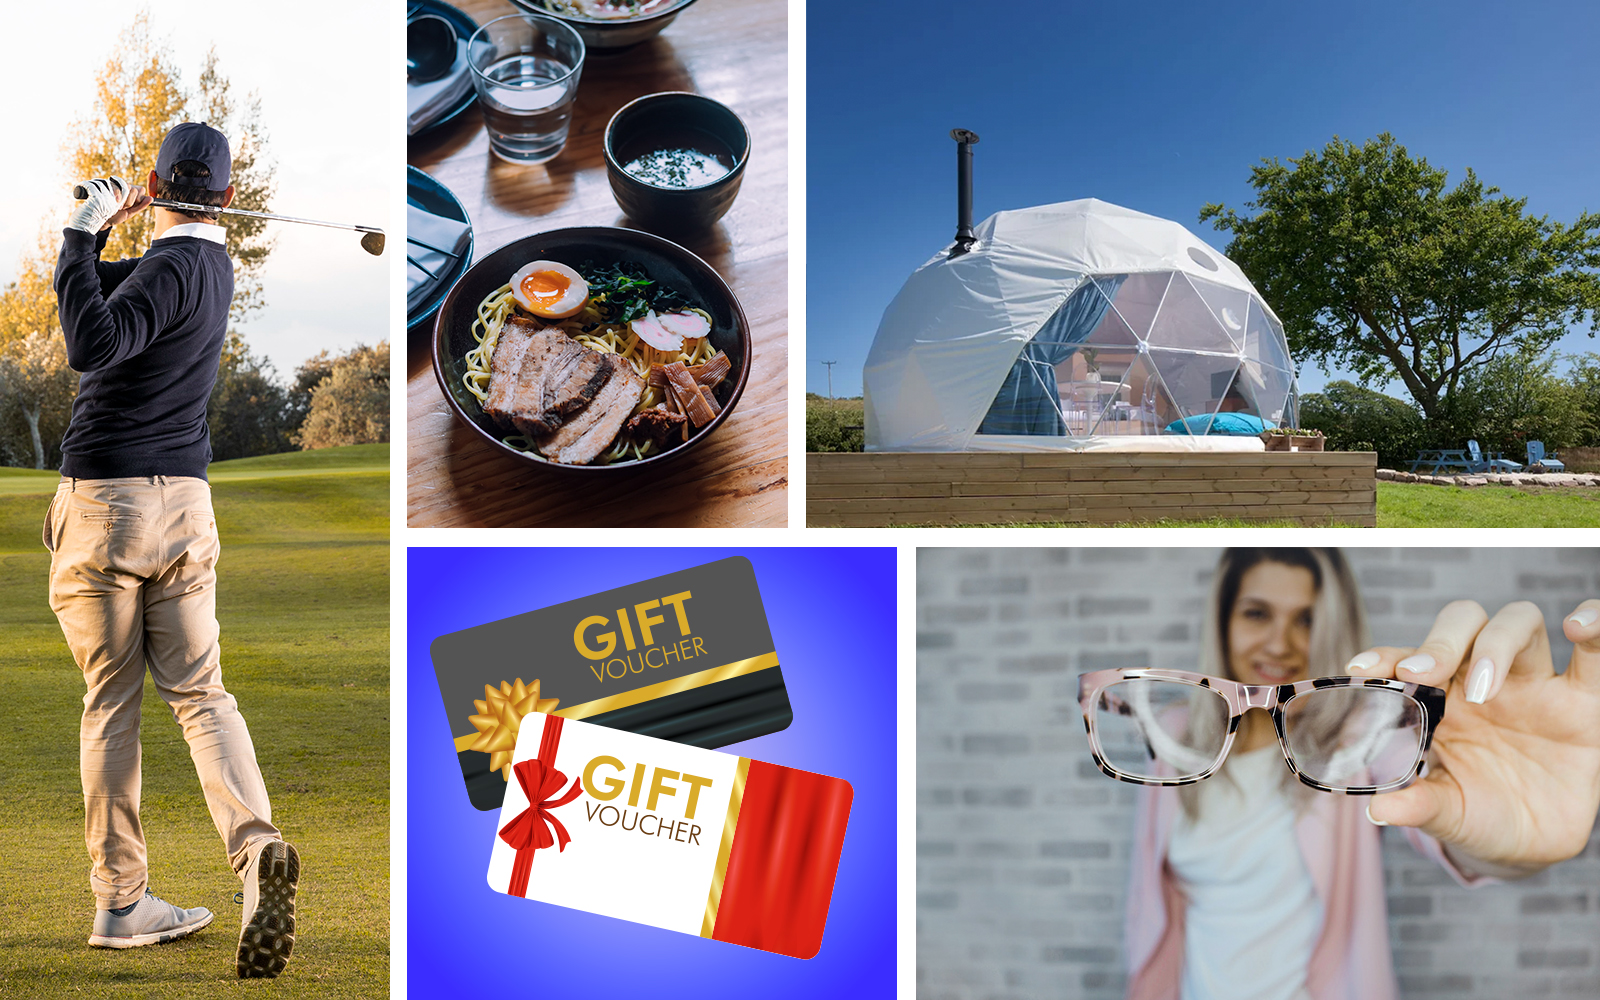 Easter Raffle promotional image showcasing golf, wagamamas food, the dome staycation, voucher image and specsavers glasses image